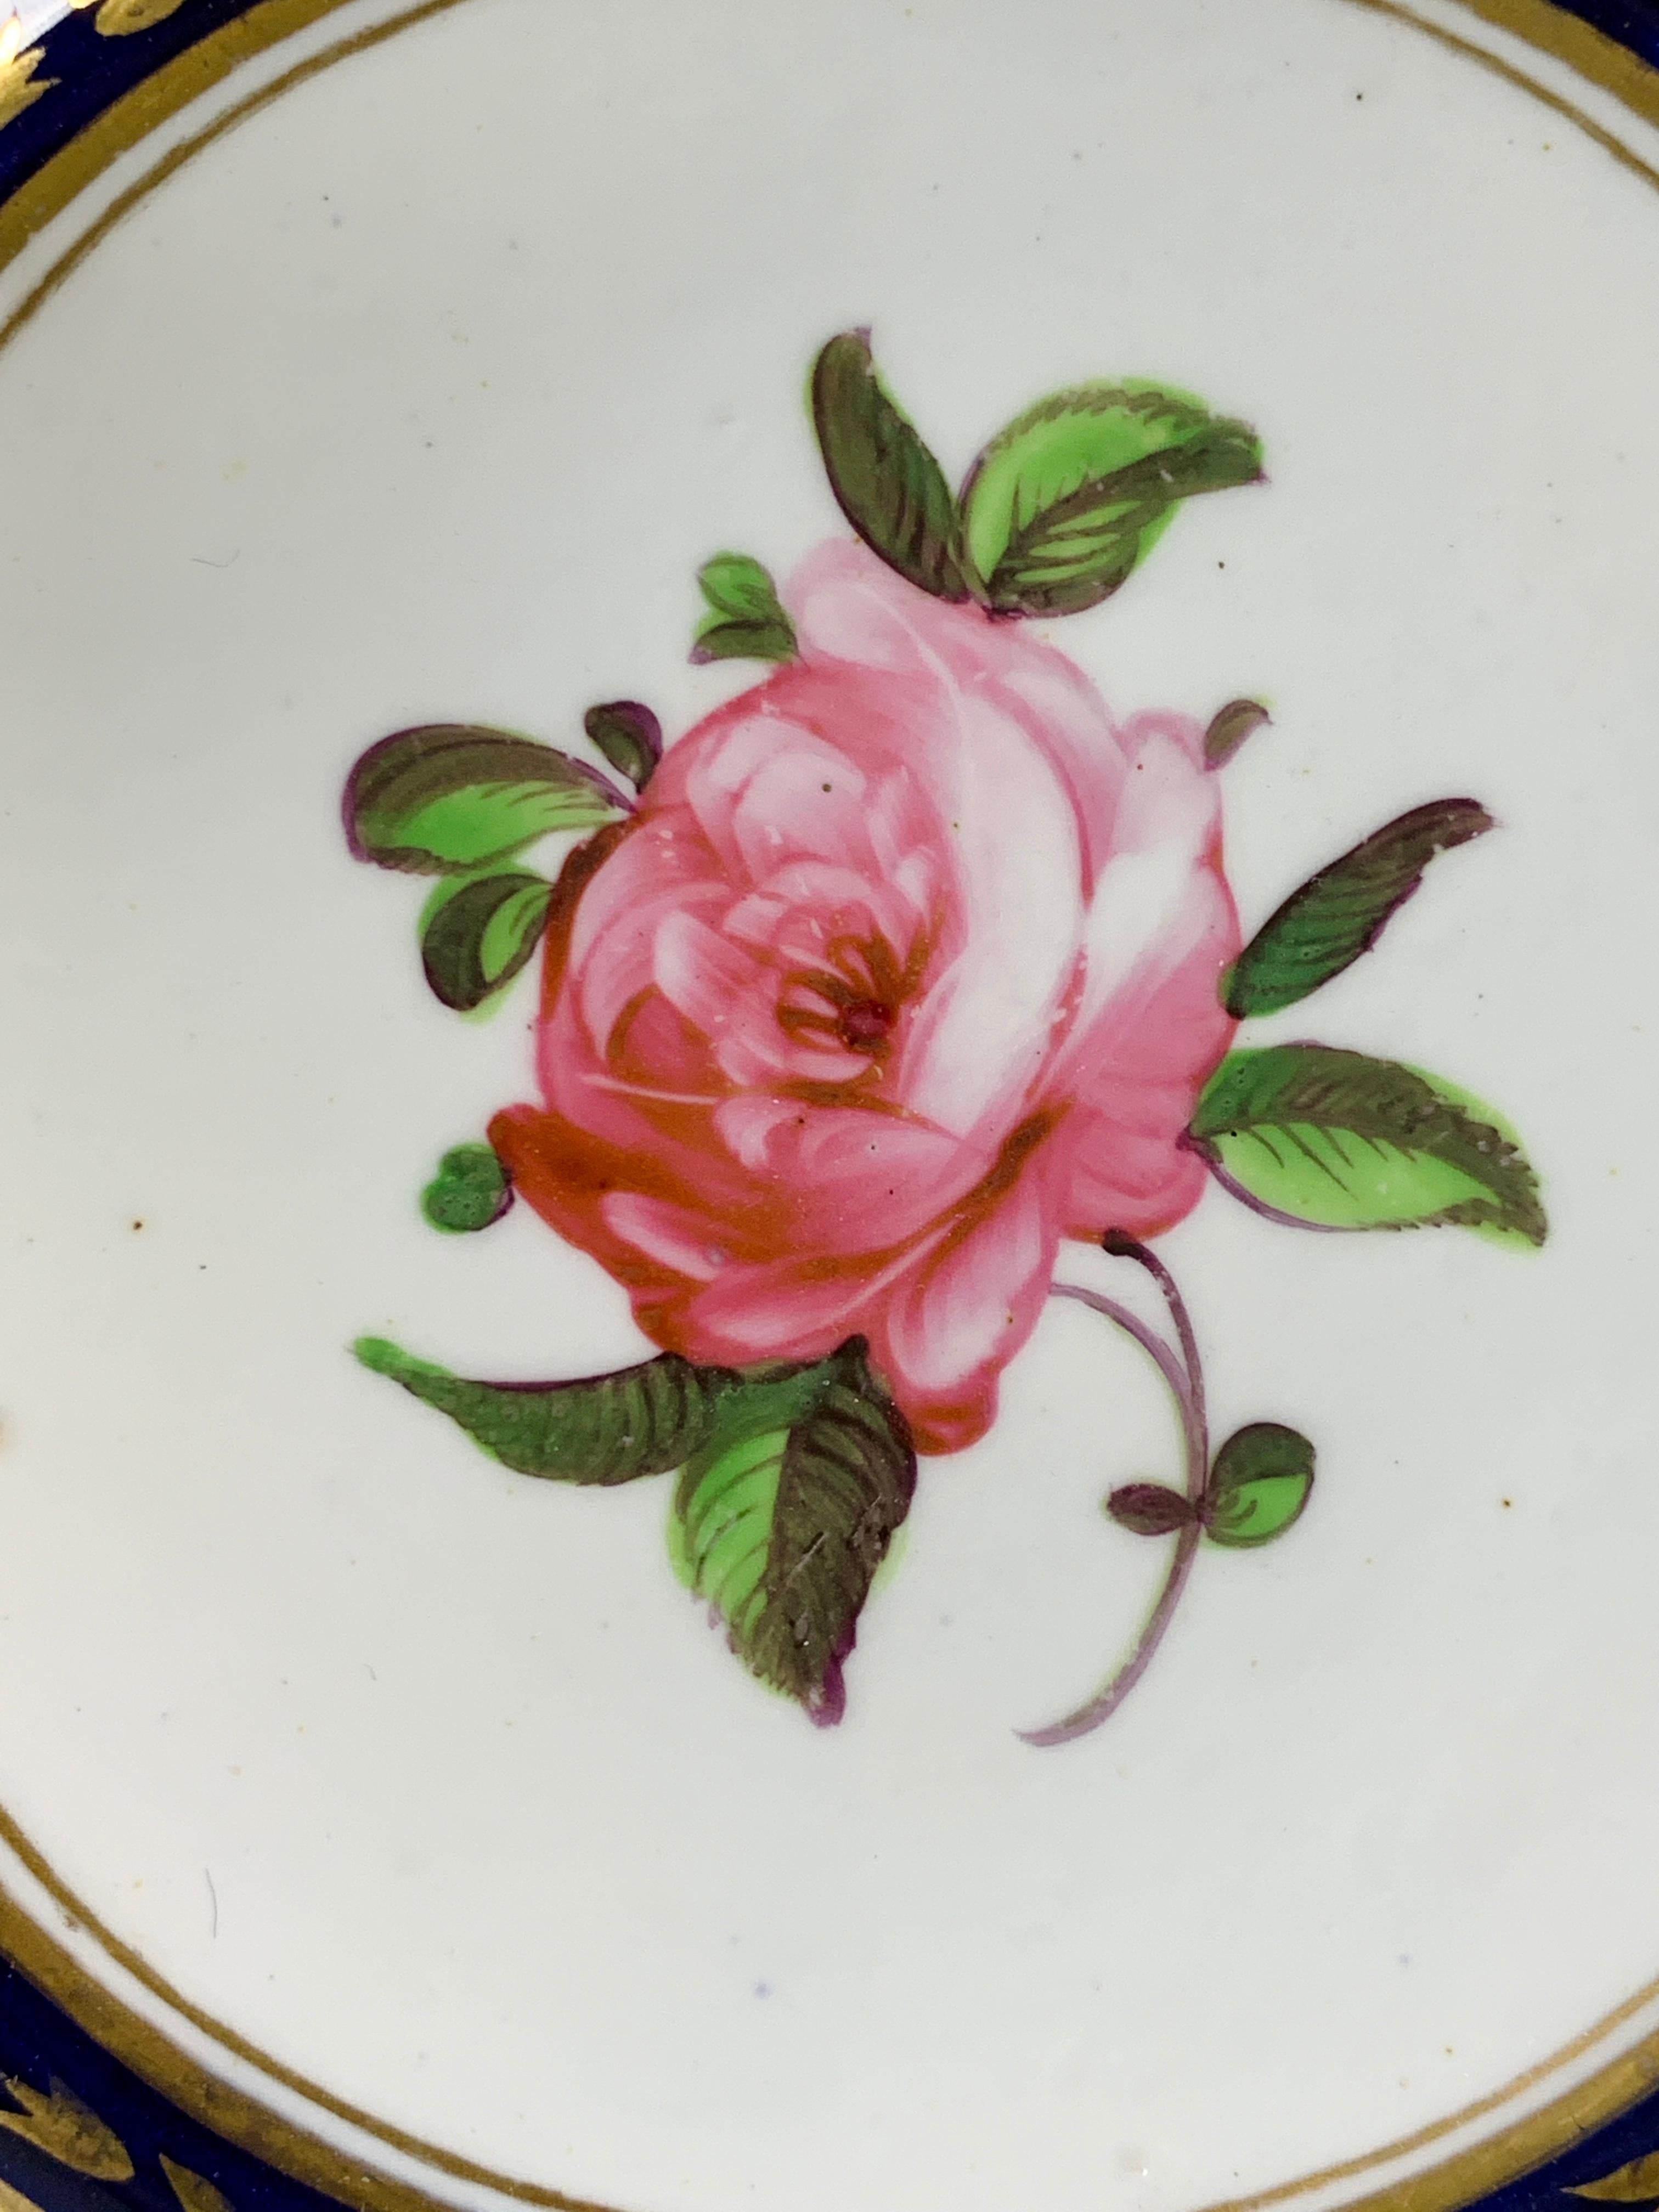 A delightful English porcelain dish made circa 1820 hand-painted with exquisite flowers on crisp white porcelain.
In the center is a lovely pink rose. Other roses, forget me nots, and other flowers with trailing vines surround it, all bursting with